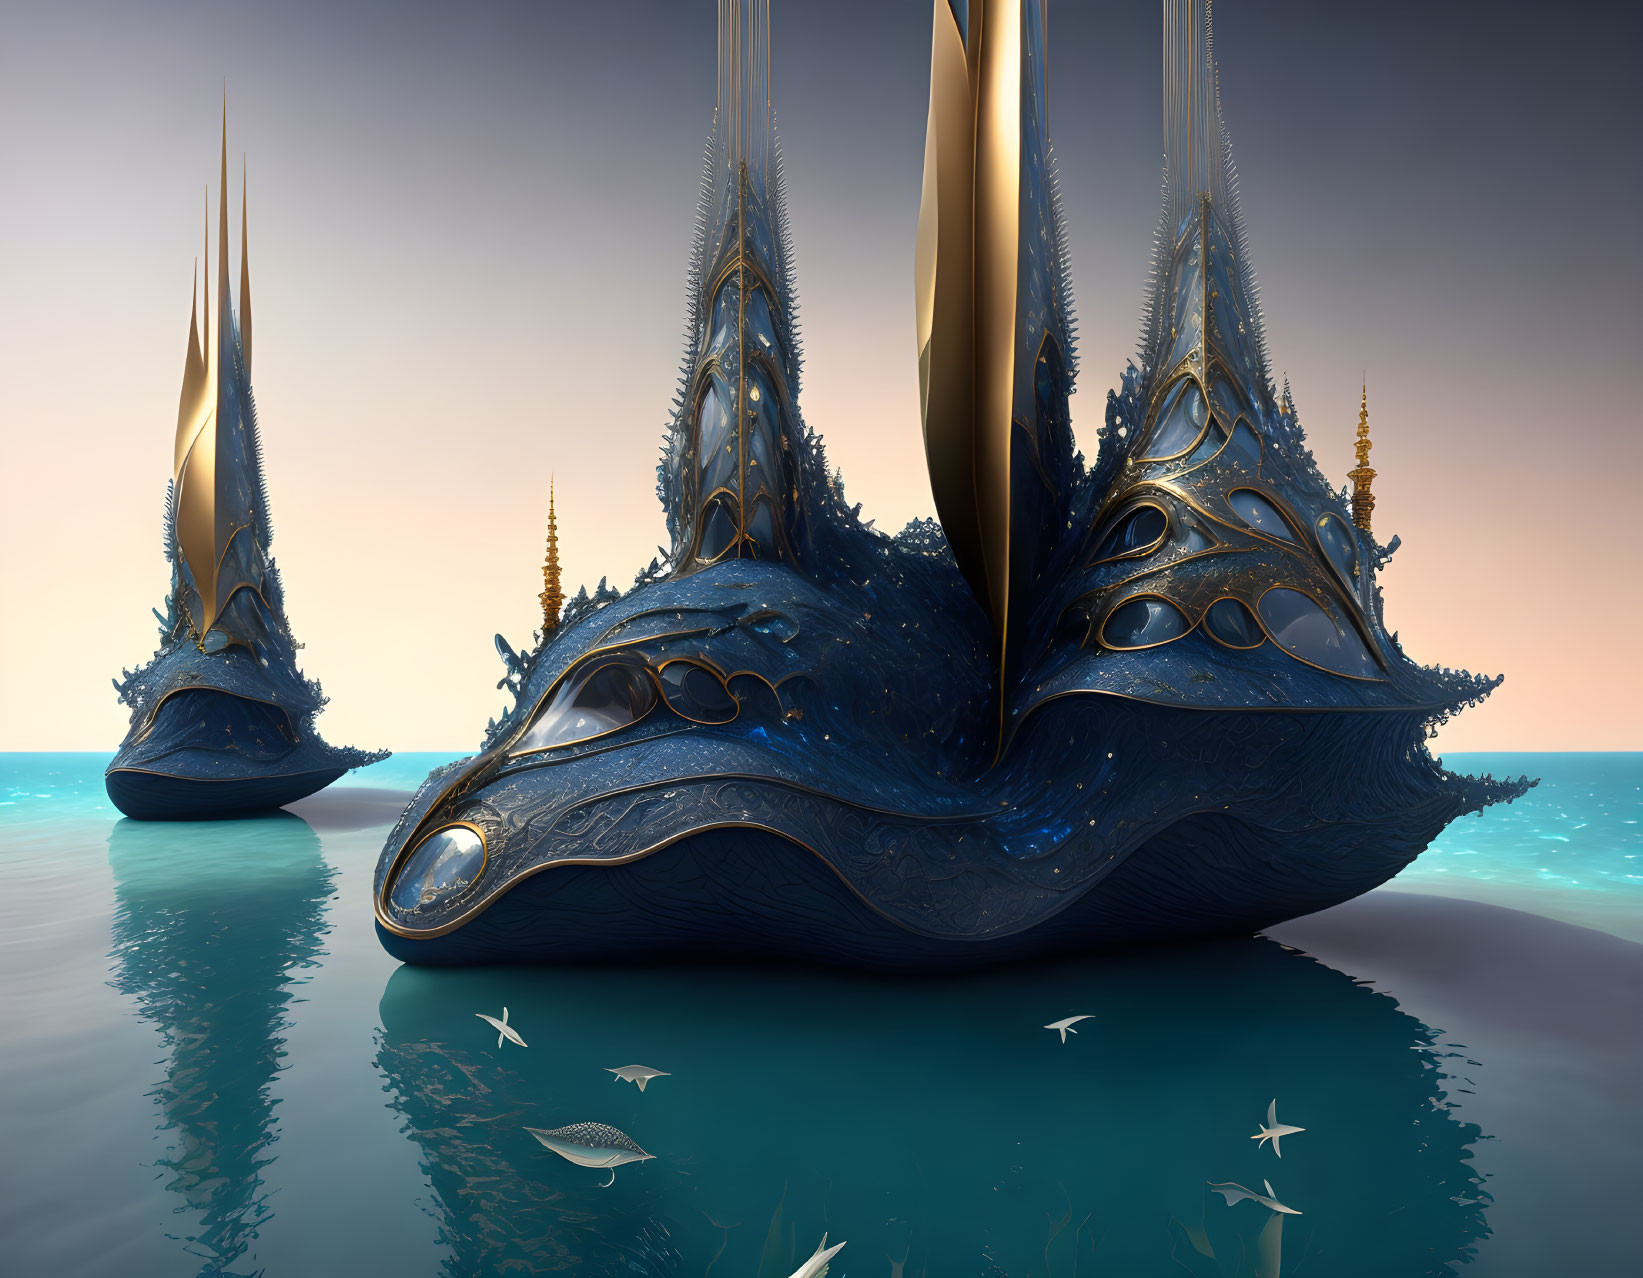 Surreal landscape with floating blue structures on calm water